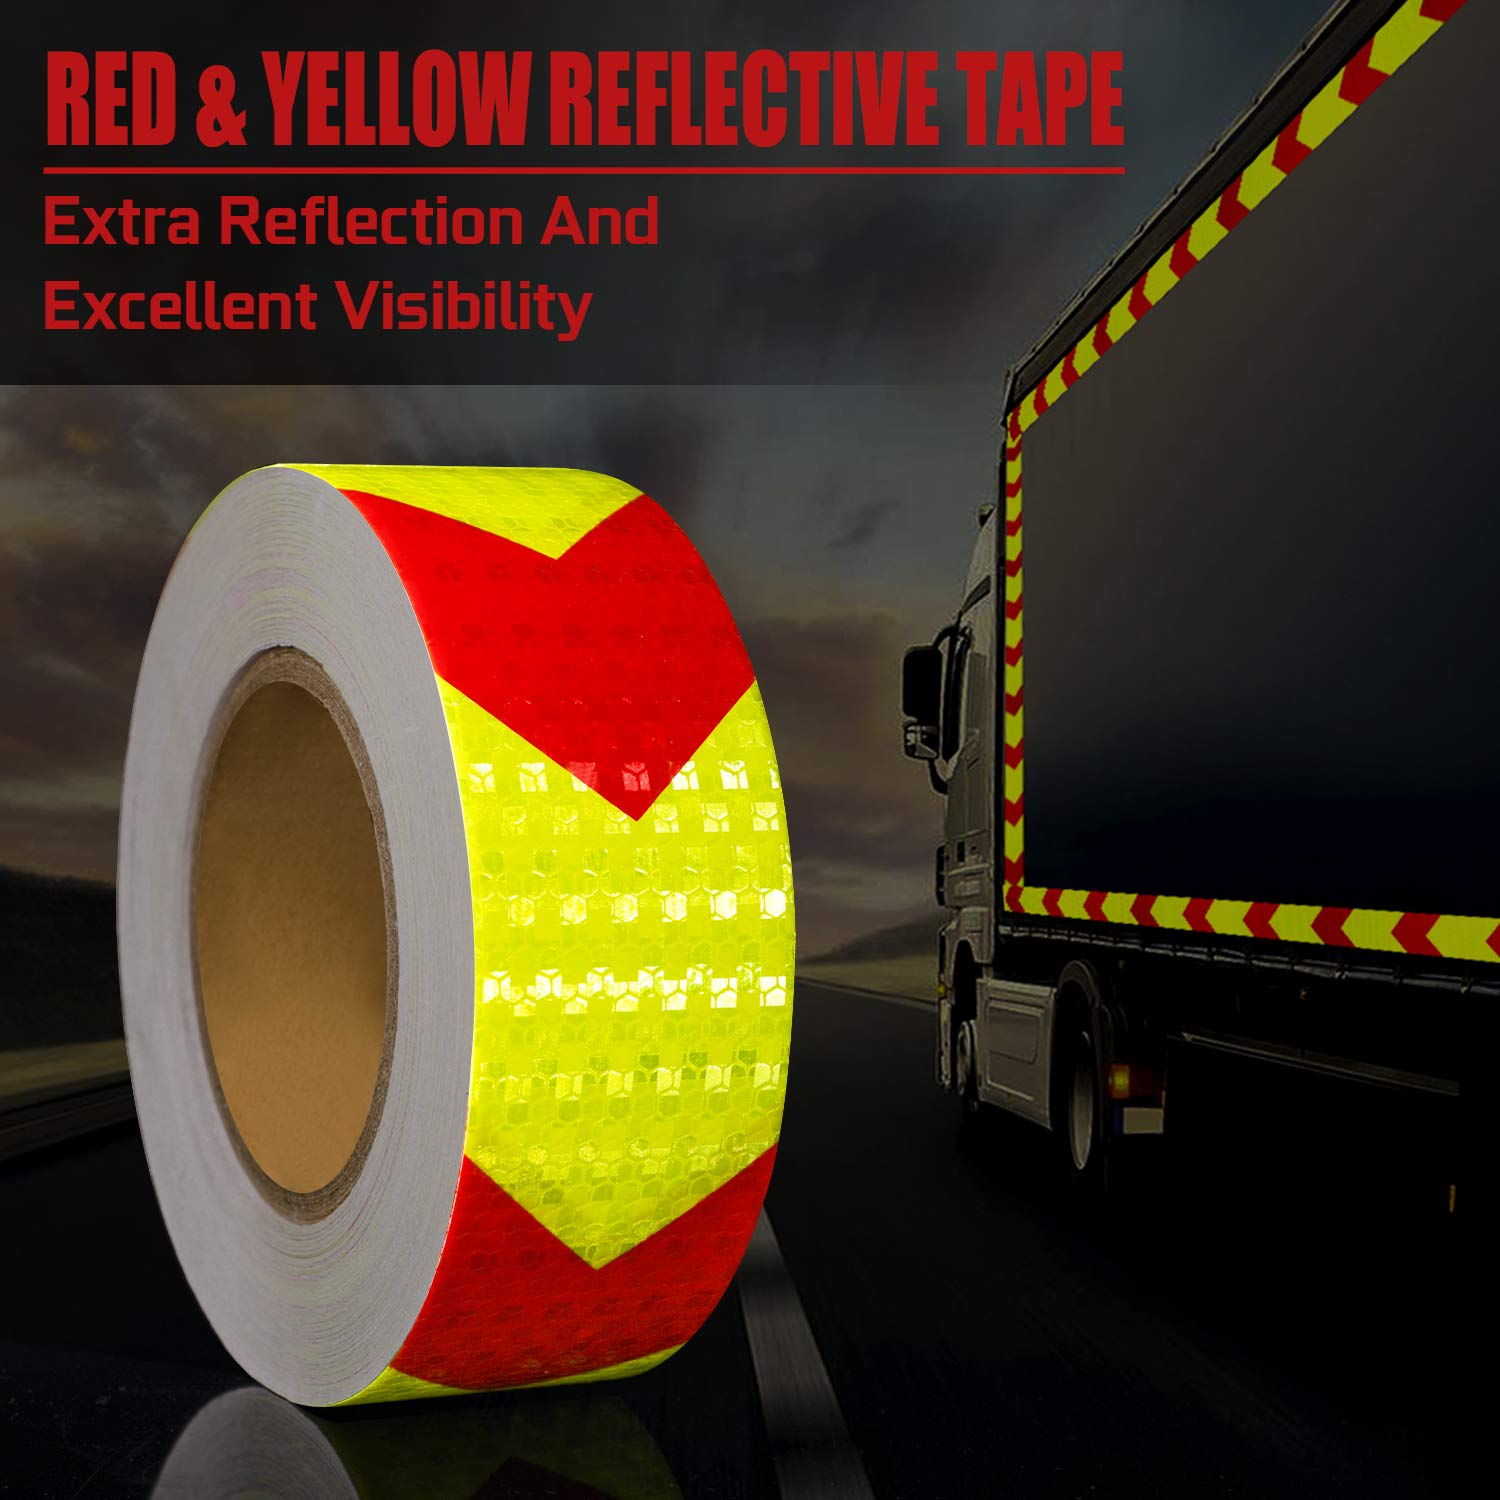 PVC Self-adhesive Reflective Safety Warning Arrow Sticker Tapes for Vehicles